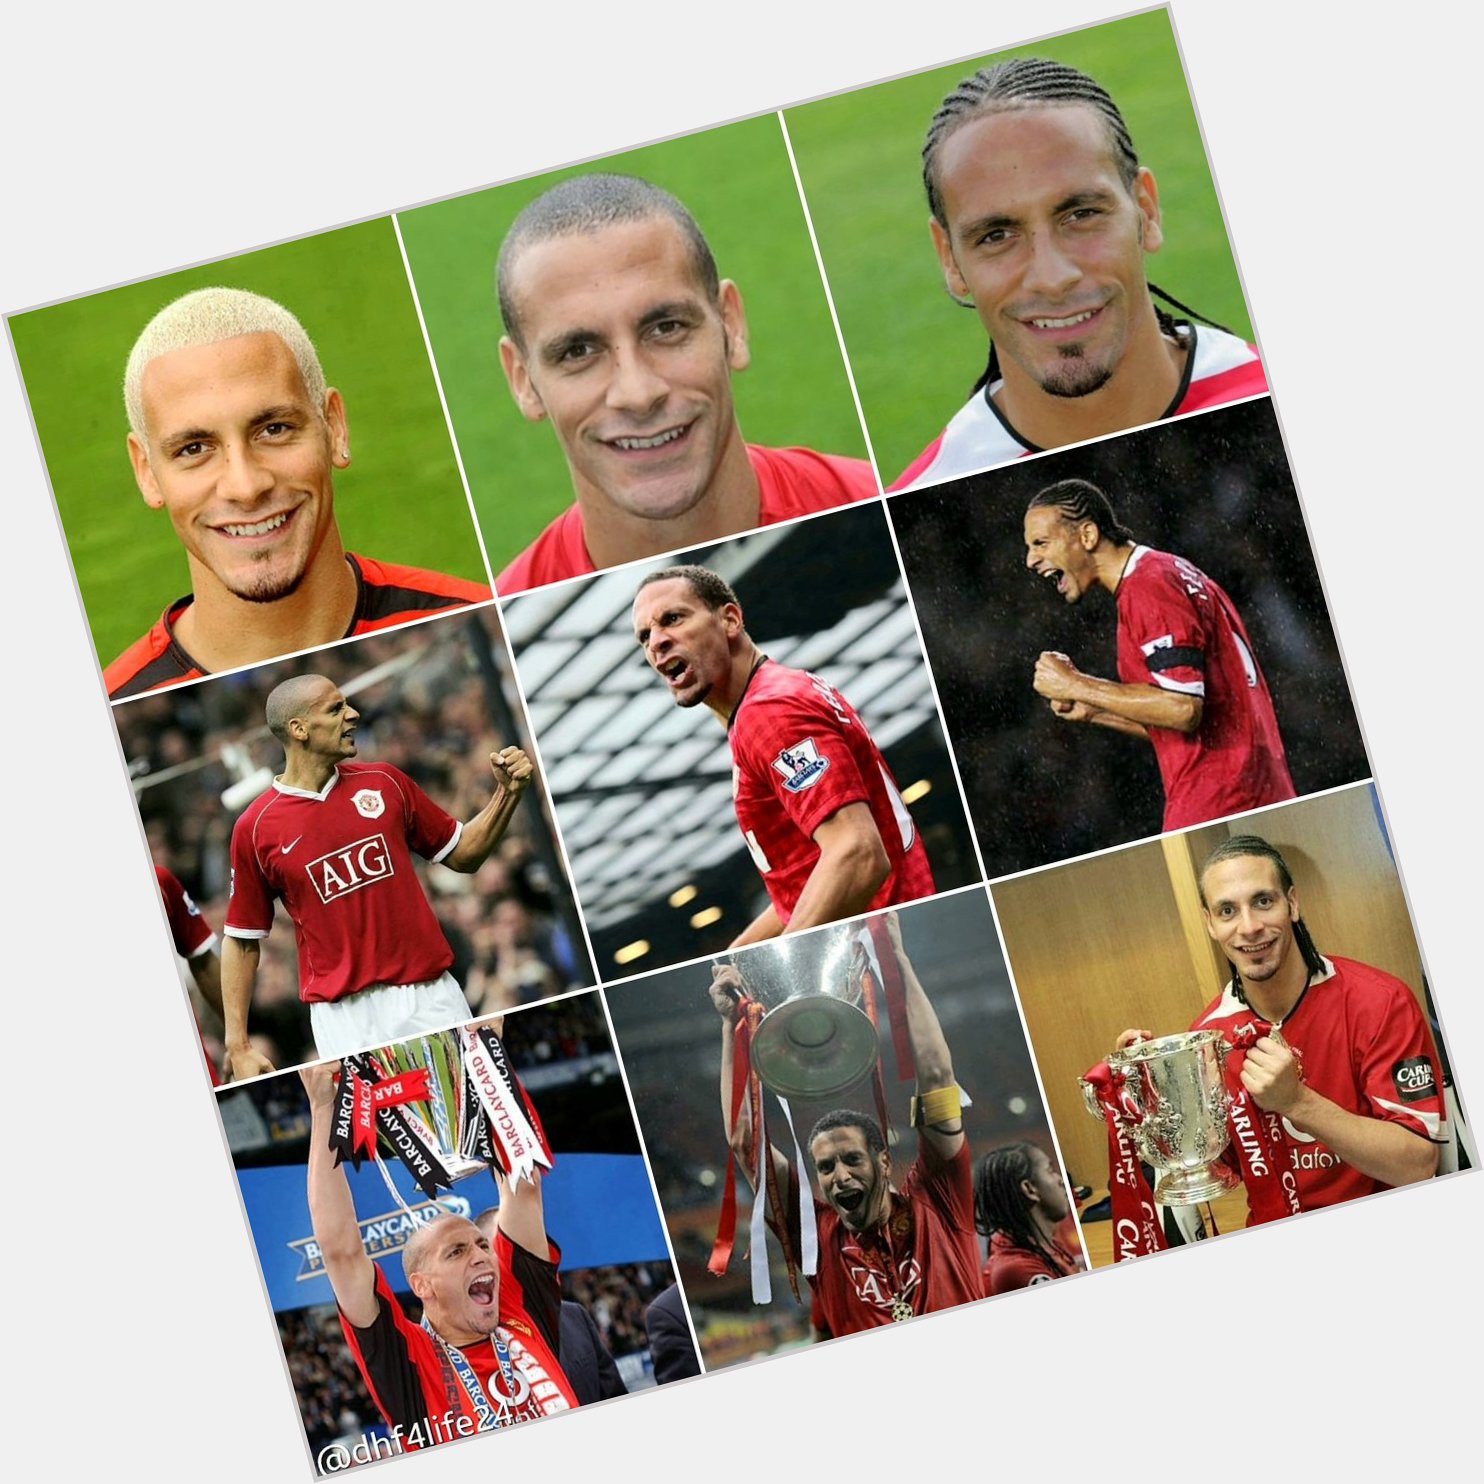 Happy 44th Birthday   on 07th November 2022 to Rio Ferdinand - What a Player and LEGEND... 